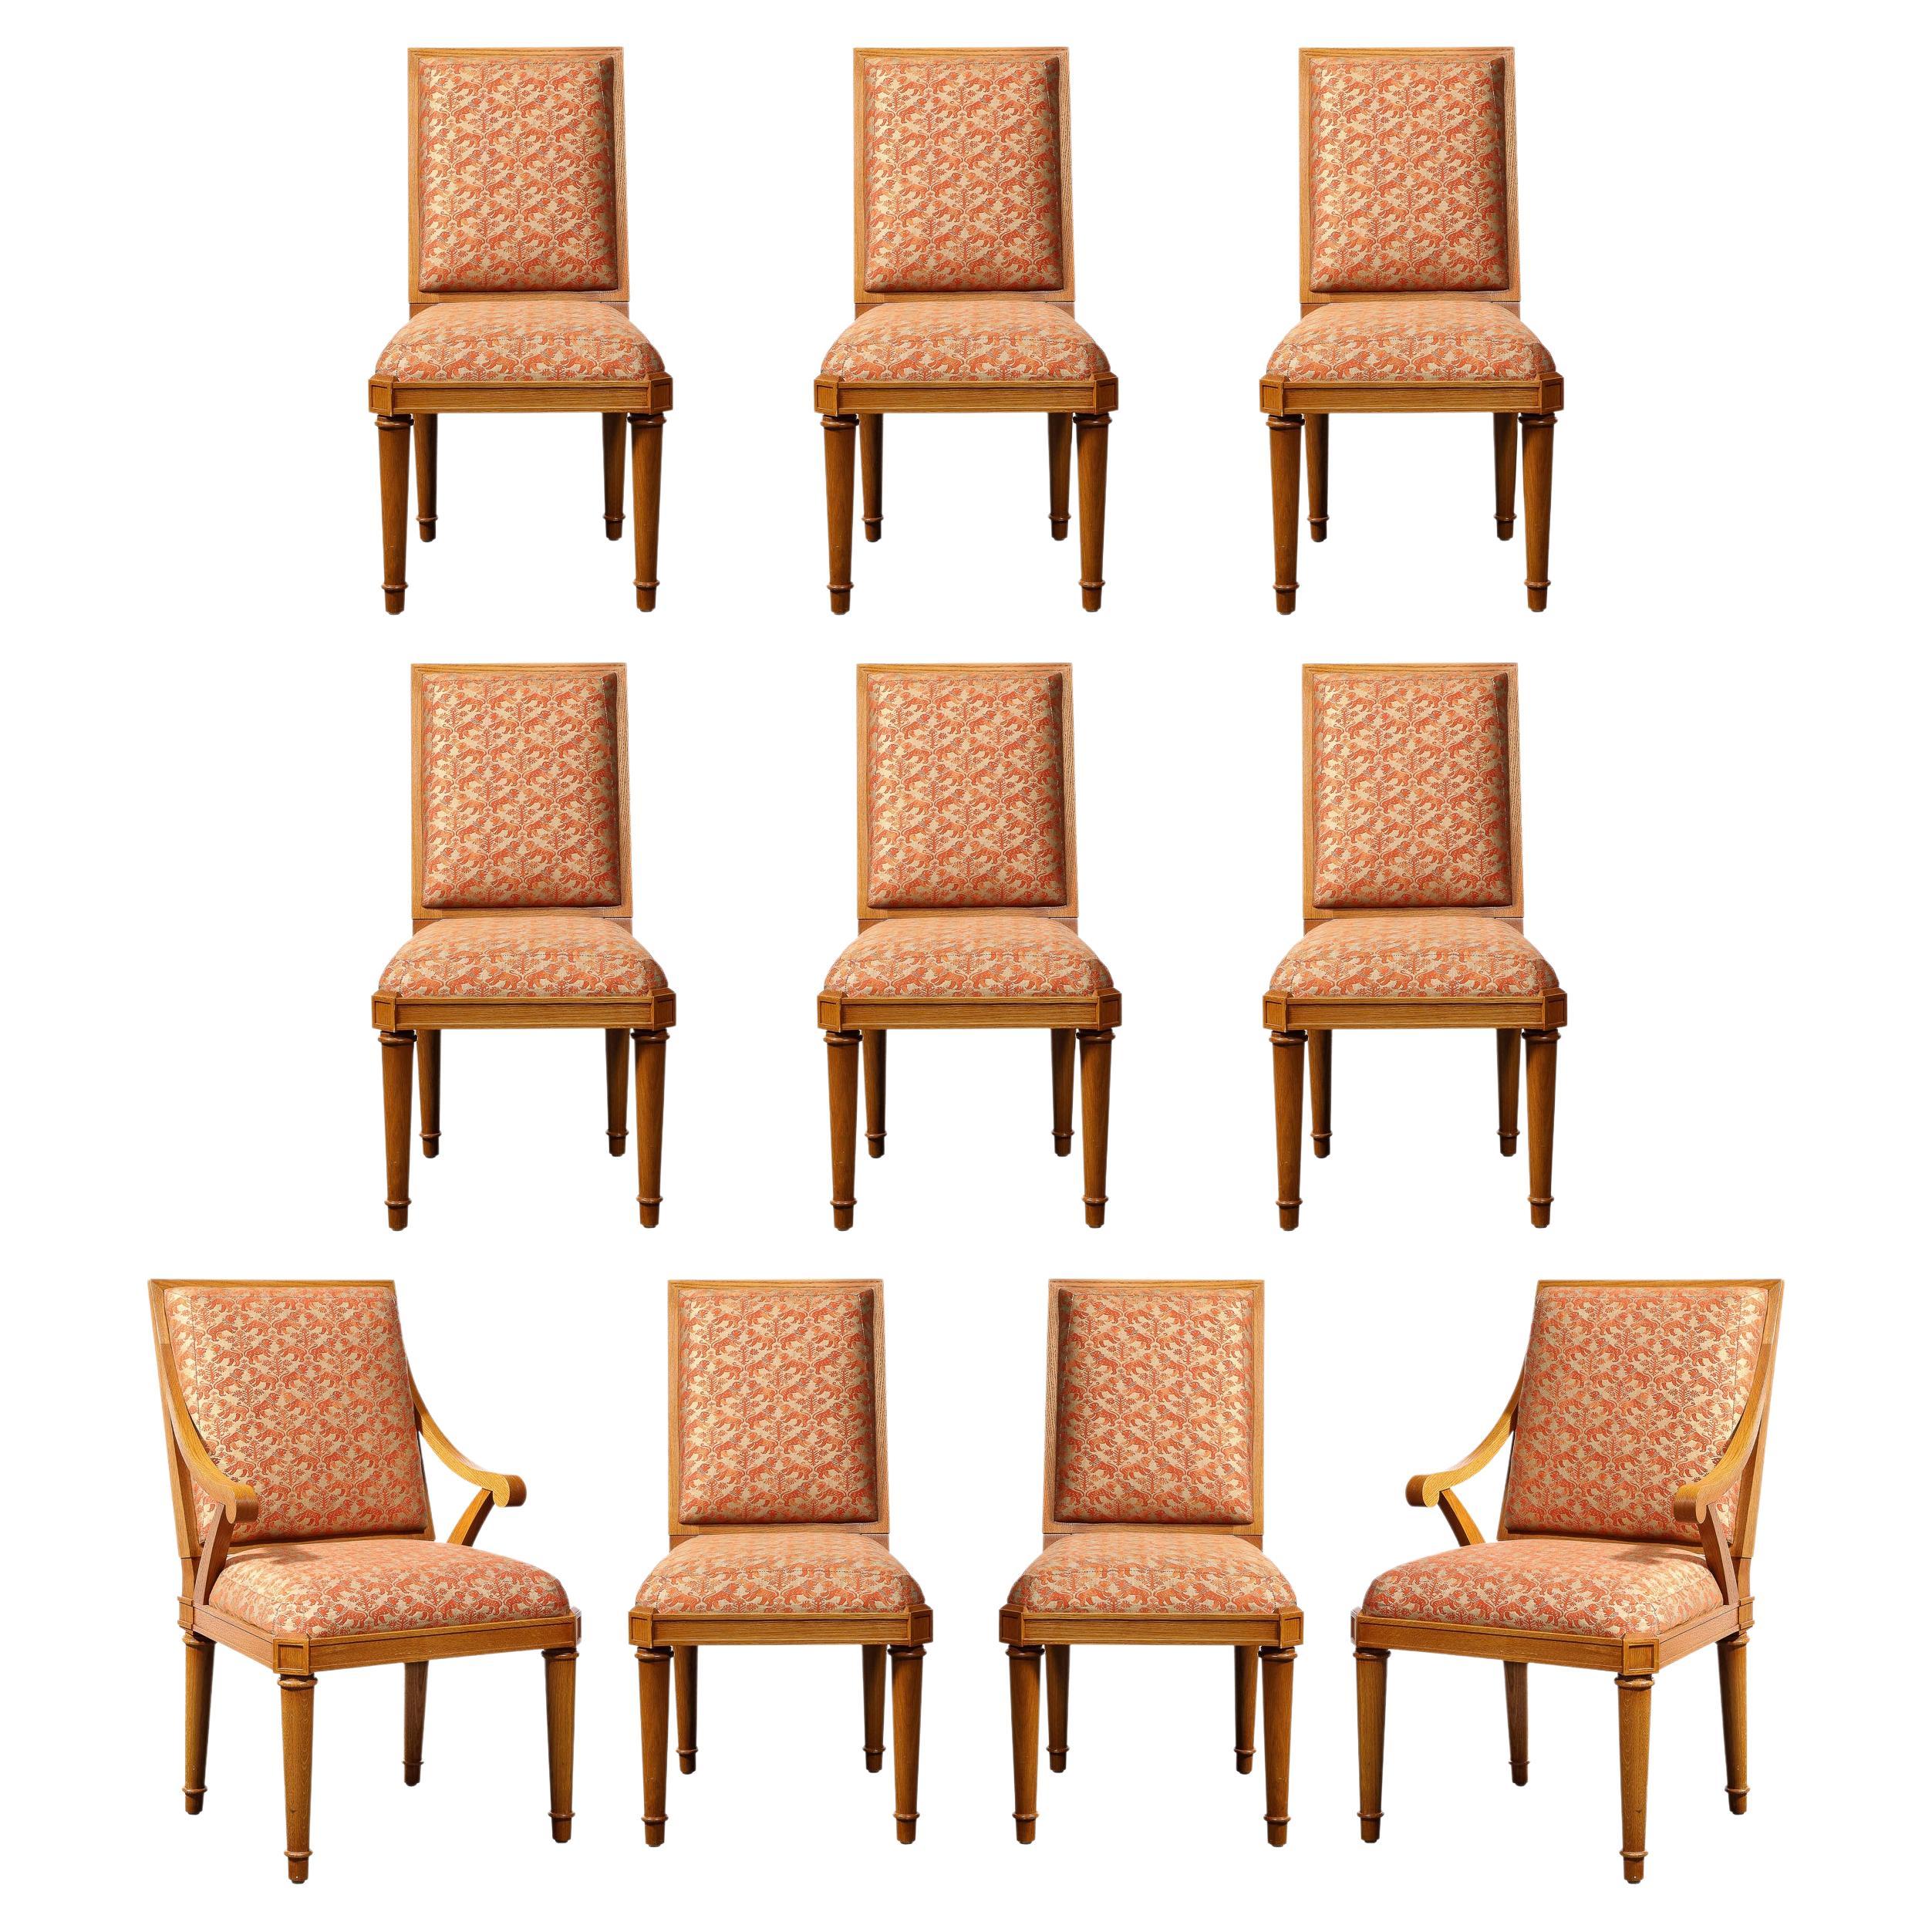 Set of 10 Art Deco Directoir Style Dining Chairs in Hand-Rubbed Oak